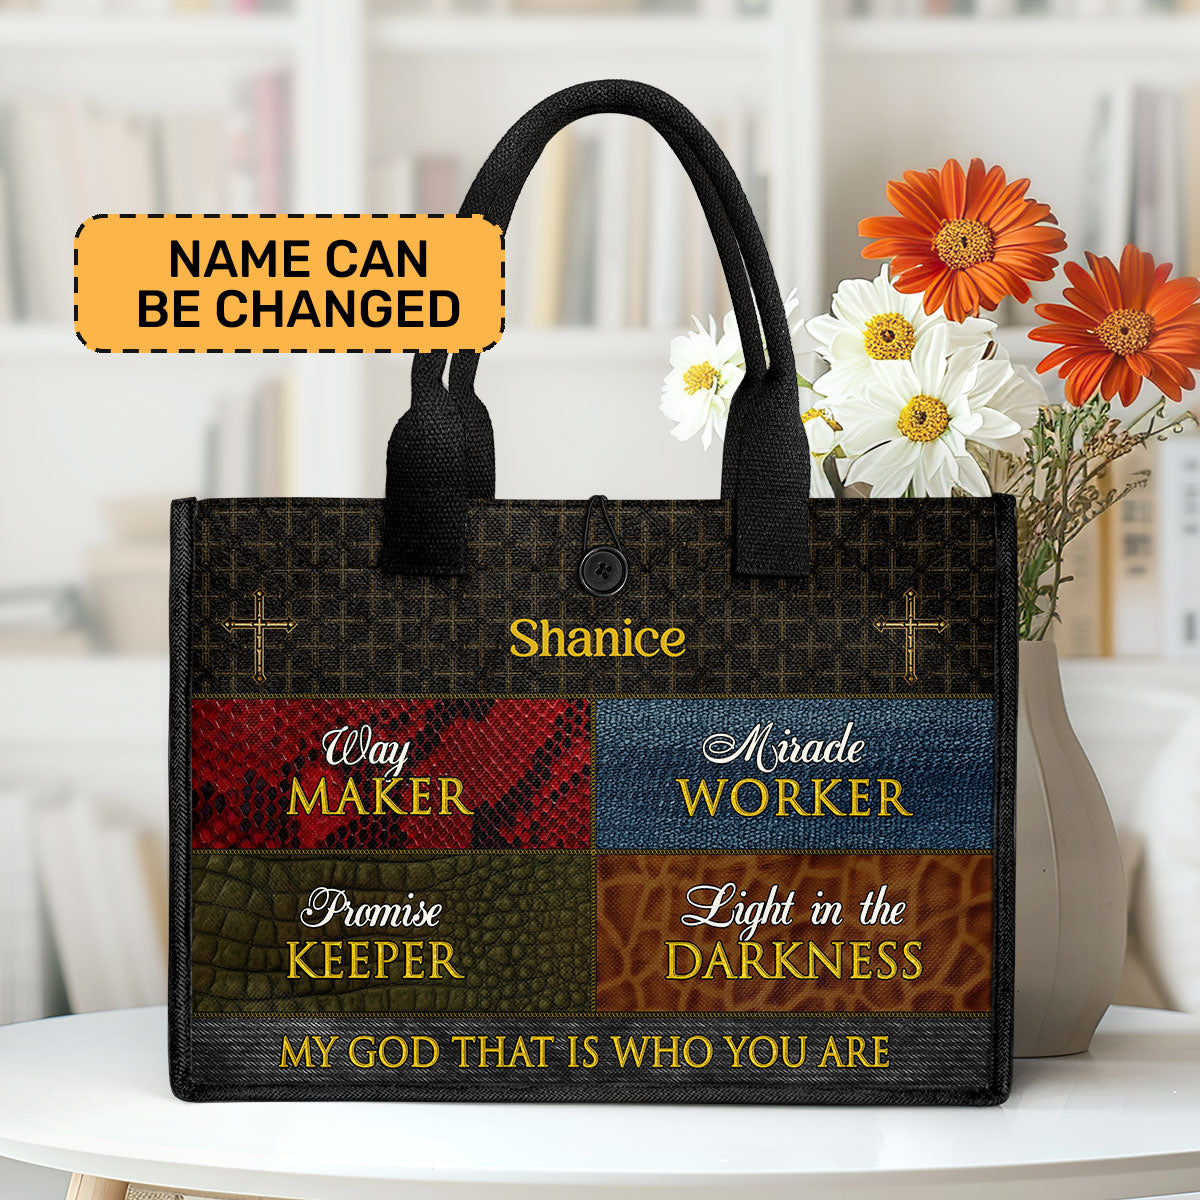 Way Maker – Personalized New Canvas Tote Bag CTBM727 – Furmaly